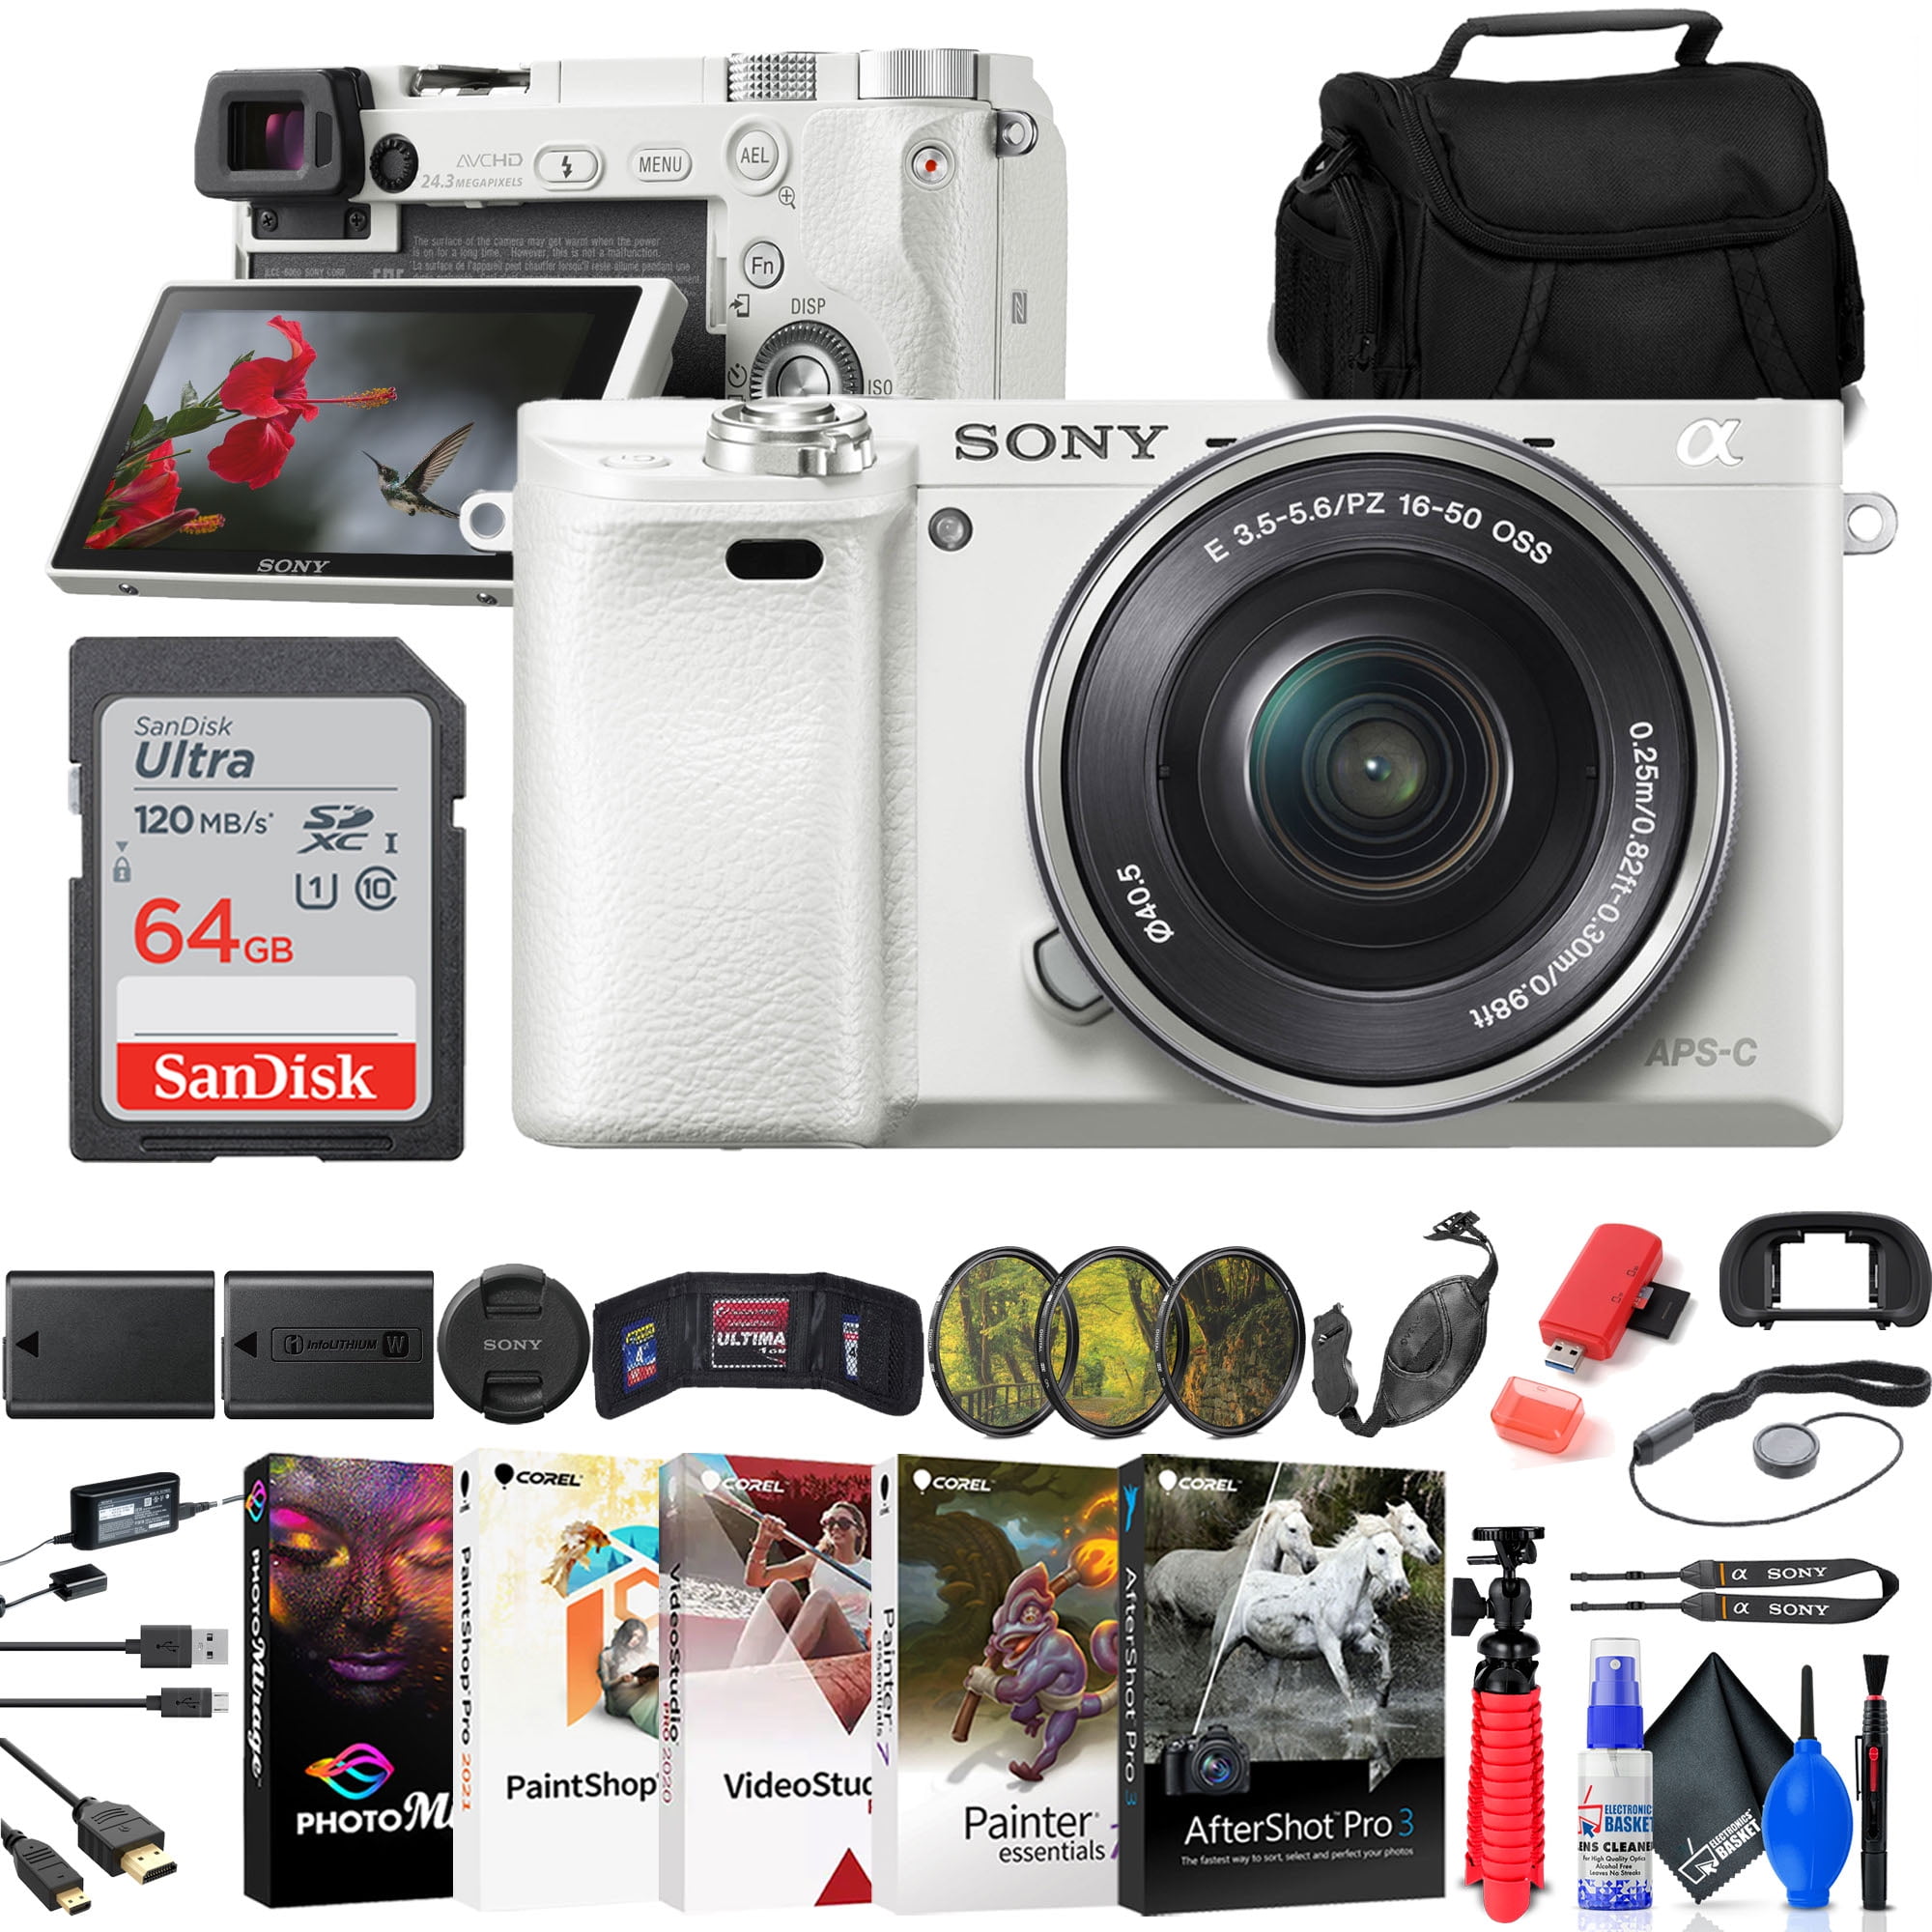 Sony Alpha a6000 Mirrorless Digital Camera with 16-50mm Lens (White)  (ILCE6000L/W) + Filter Kit + 64GB Card + NPF-W50 Battery + Card Reader +  Corel Photo Software + Case + Flex Tripod + More 